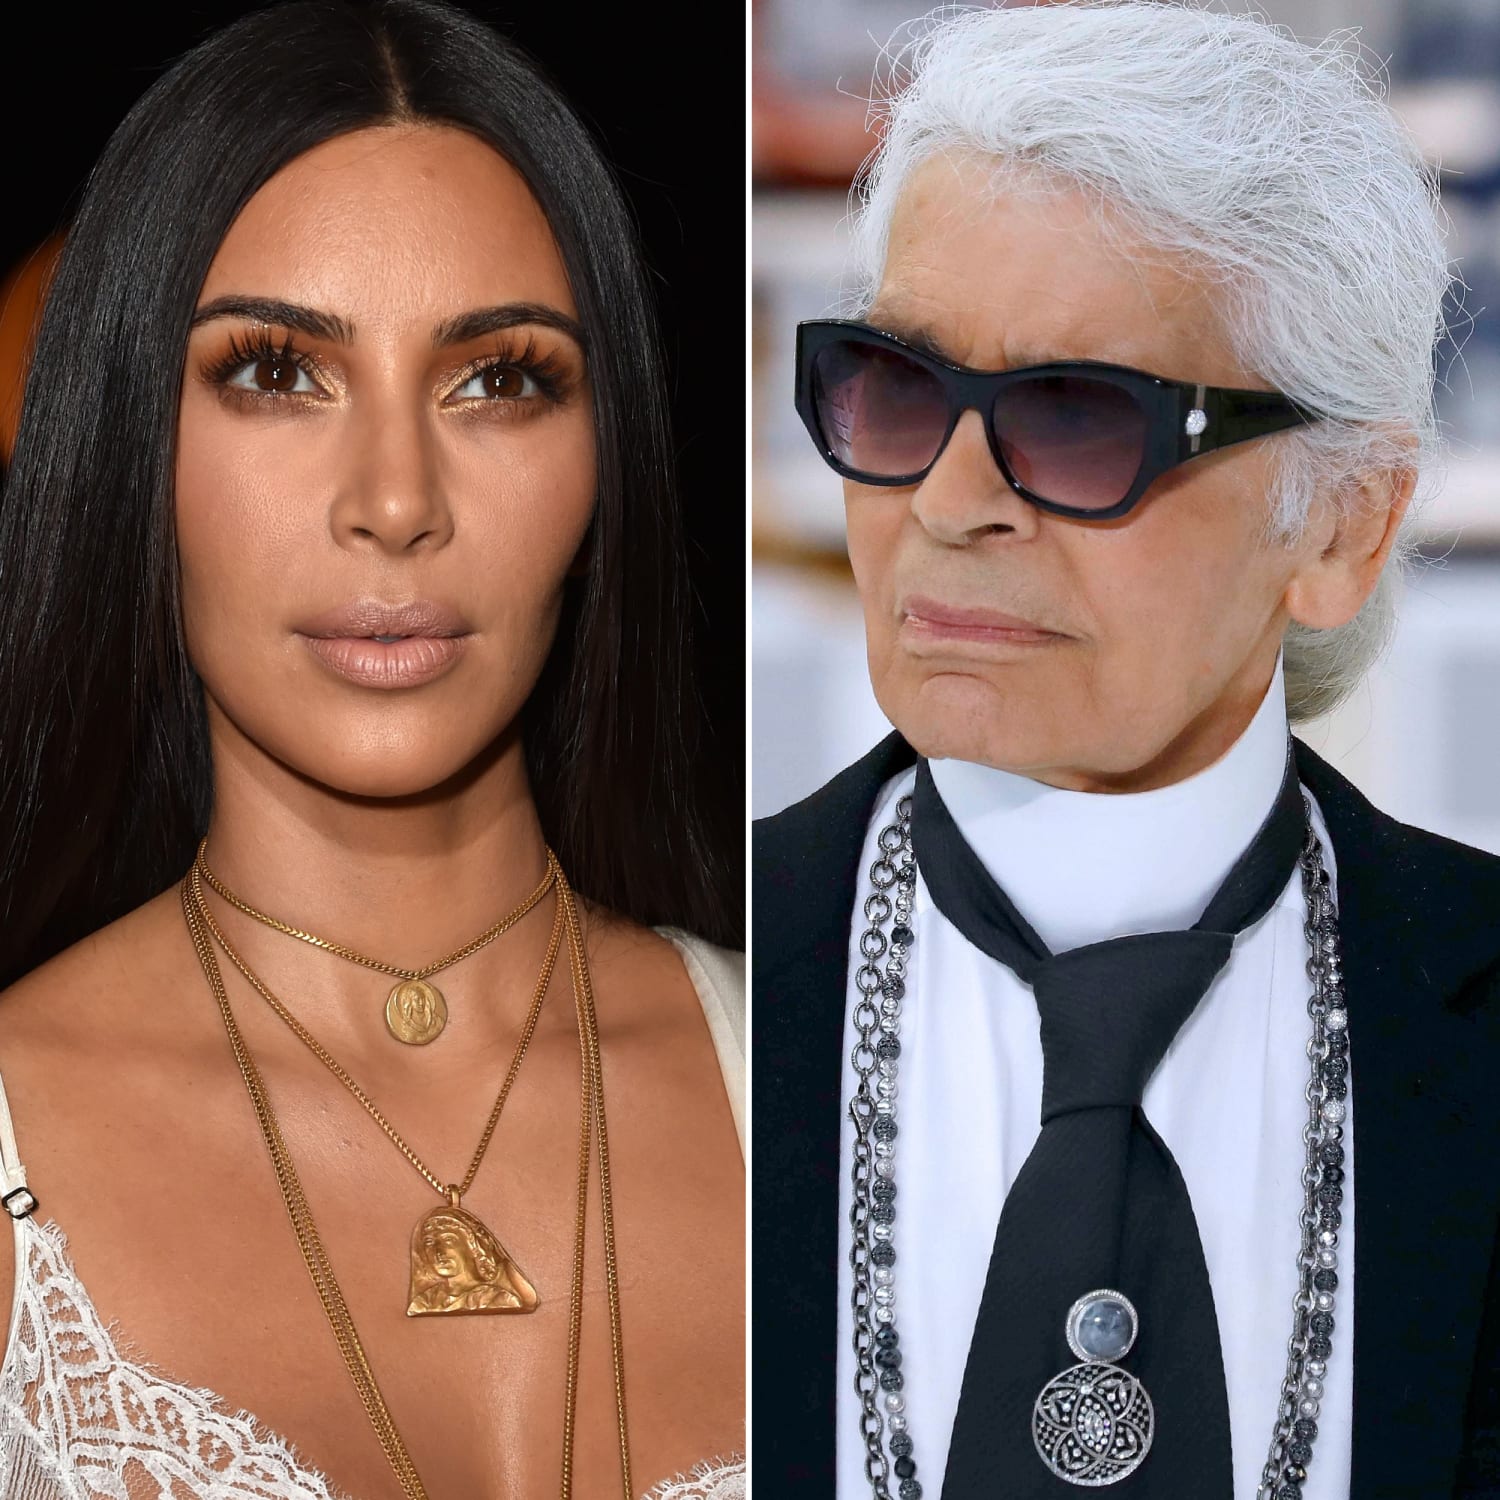 Karl Lagerfeld on Kardashian Robbery: Don't Flash Jewels With 'No